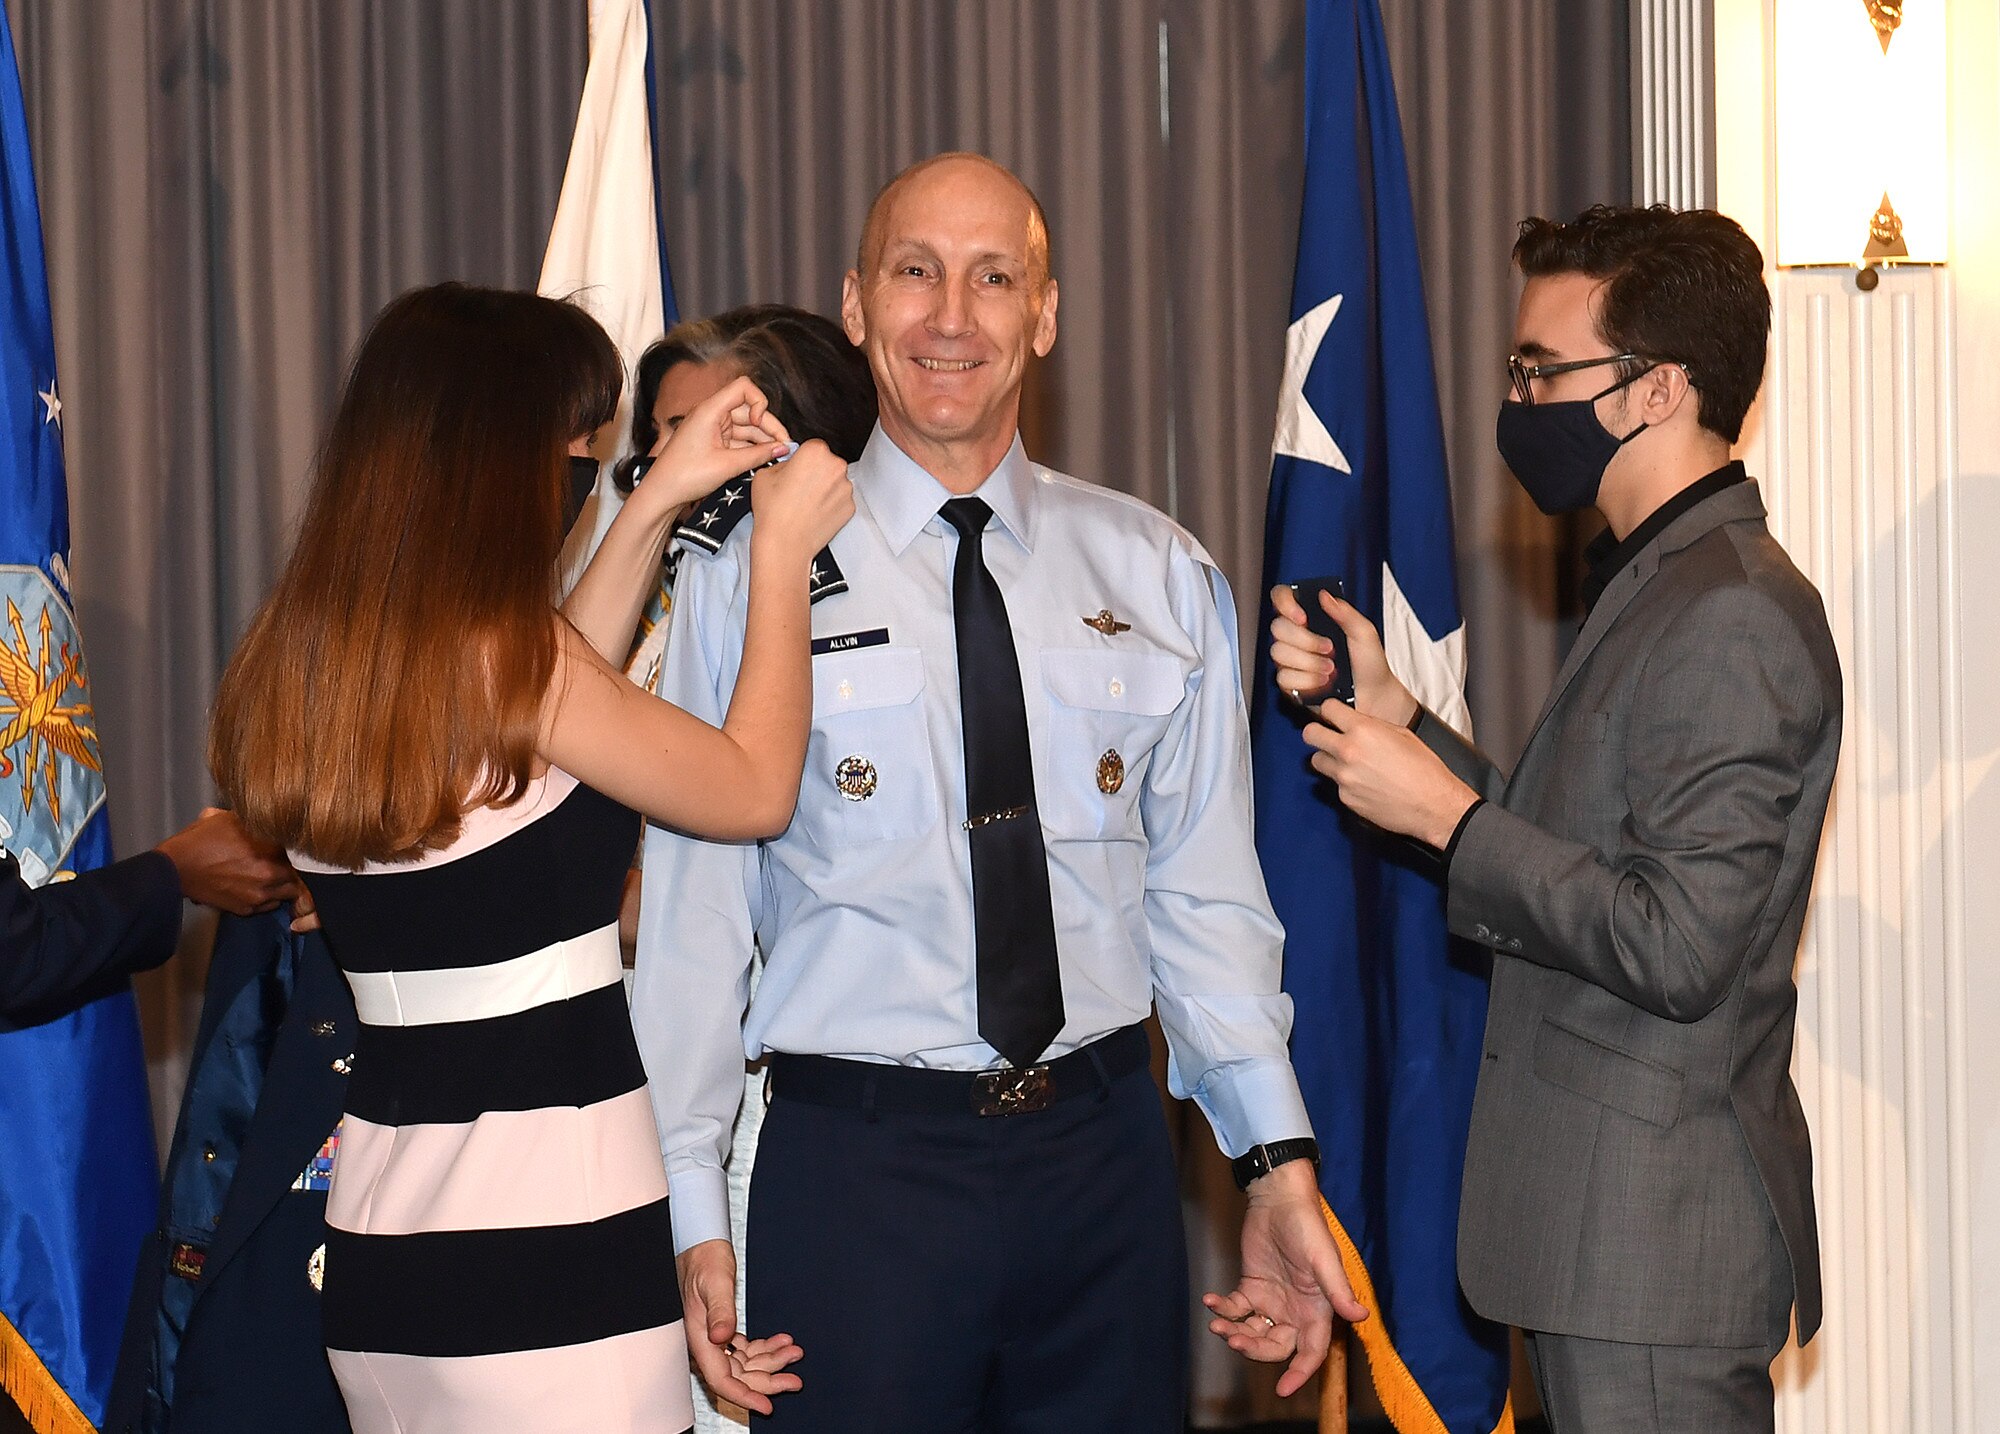 Gen. David Allvin's family places his new rank on his uniform during his promotion ceremony at Joint Base Anacostia-Bolling, Washington, D.C., Nov. 12, 2020. Allvin will serve as the 40th Vice Chief of Staff of the Air Force. (U.S. Air Force Photo by Andy Morataya)